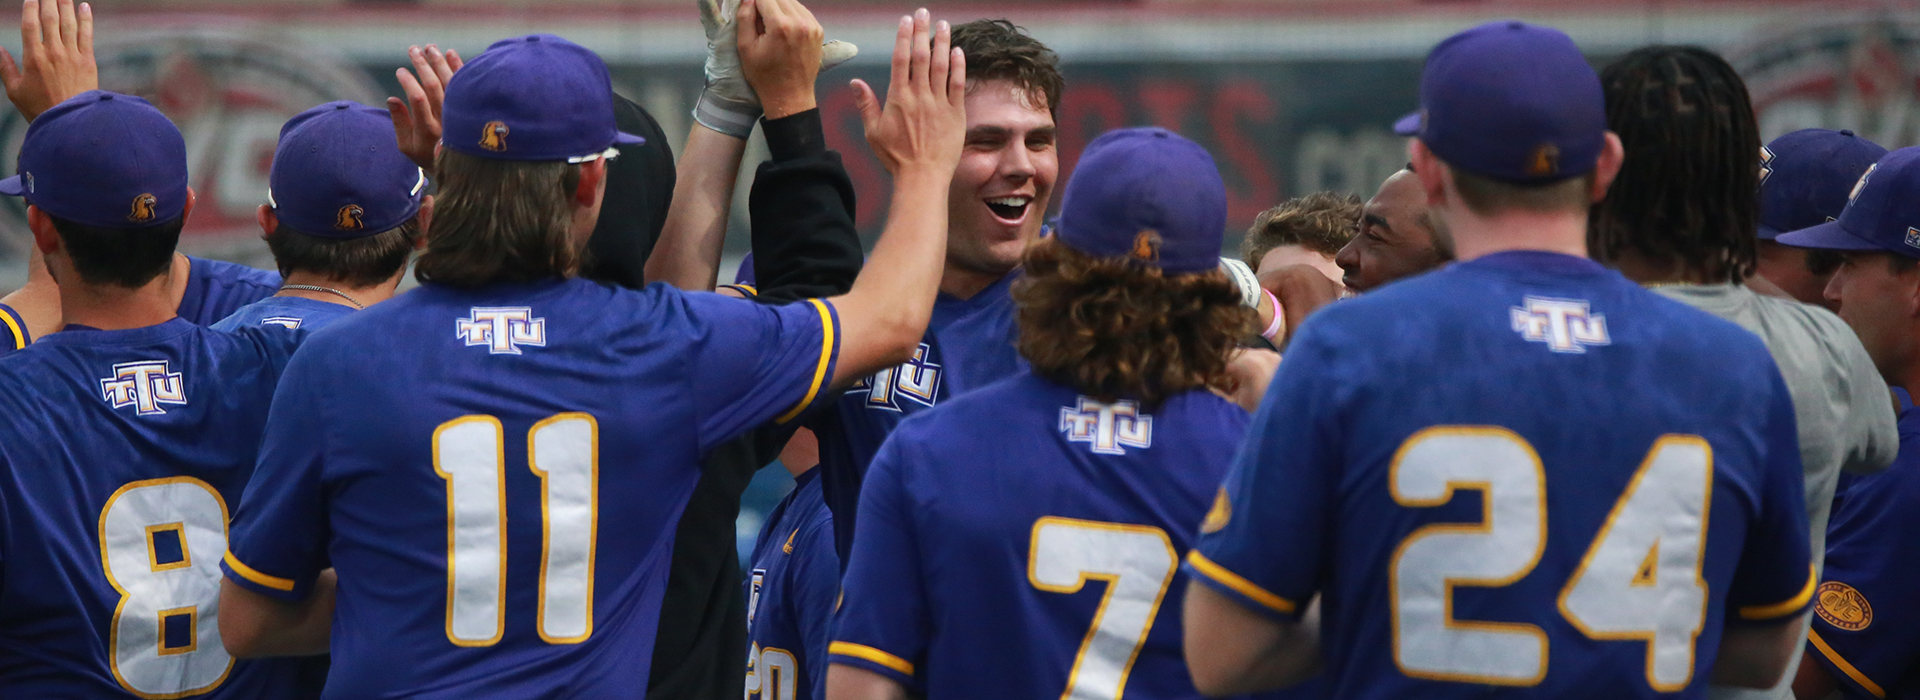 Golden Eagles rally late, hold off Redhawks to advance to OVC Tournament semifinals